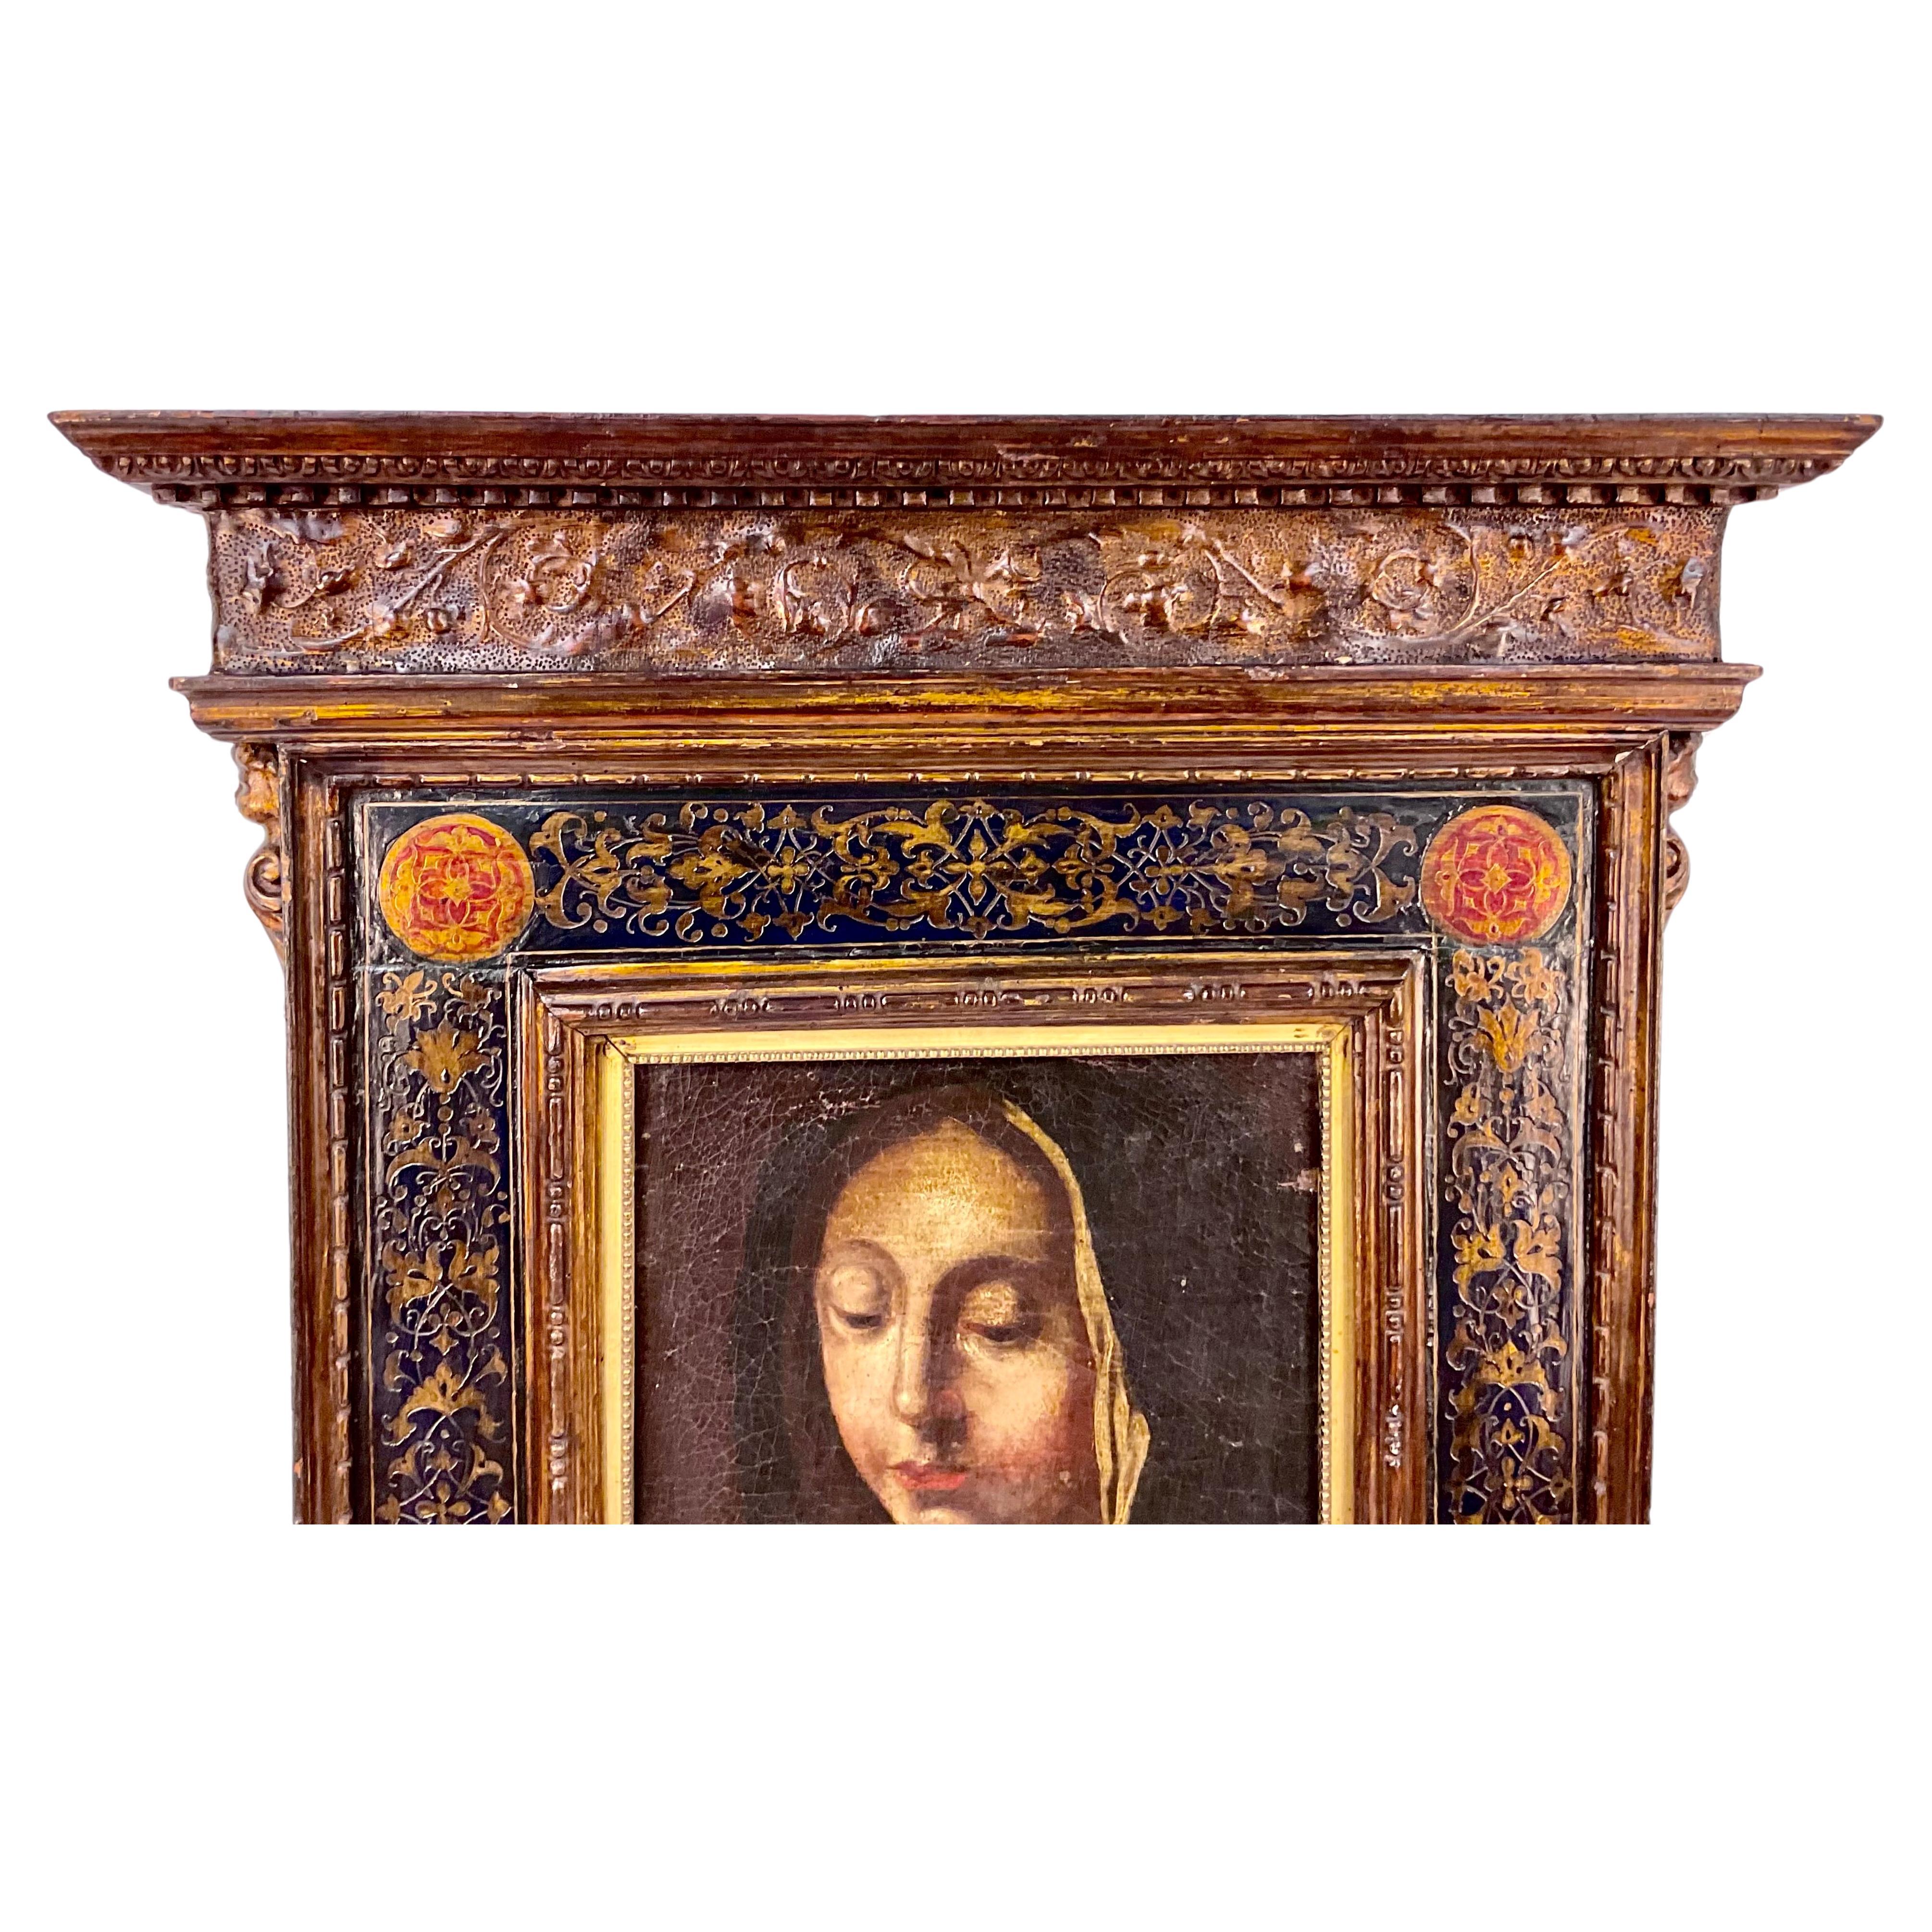 Fine 17th Century Italian School Old Master depiction of the Madonna, oil on canvas. Features navy, red and gold coloring. Navy outer portrait border contains floral motif with red and gold medallions in each corner.  Painting is framed in a very